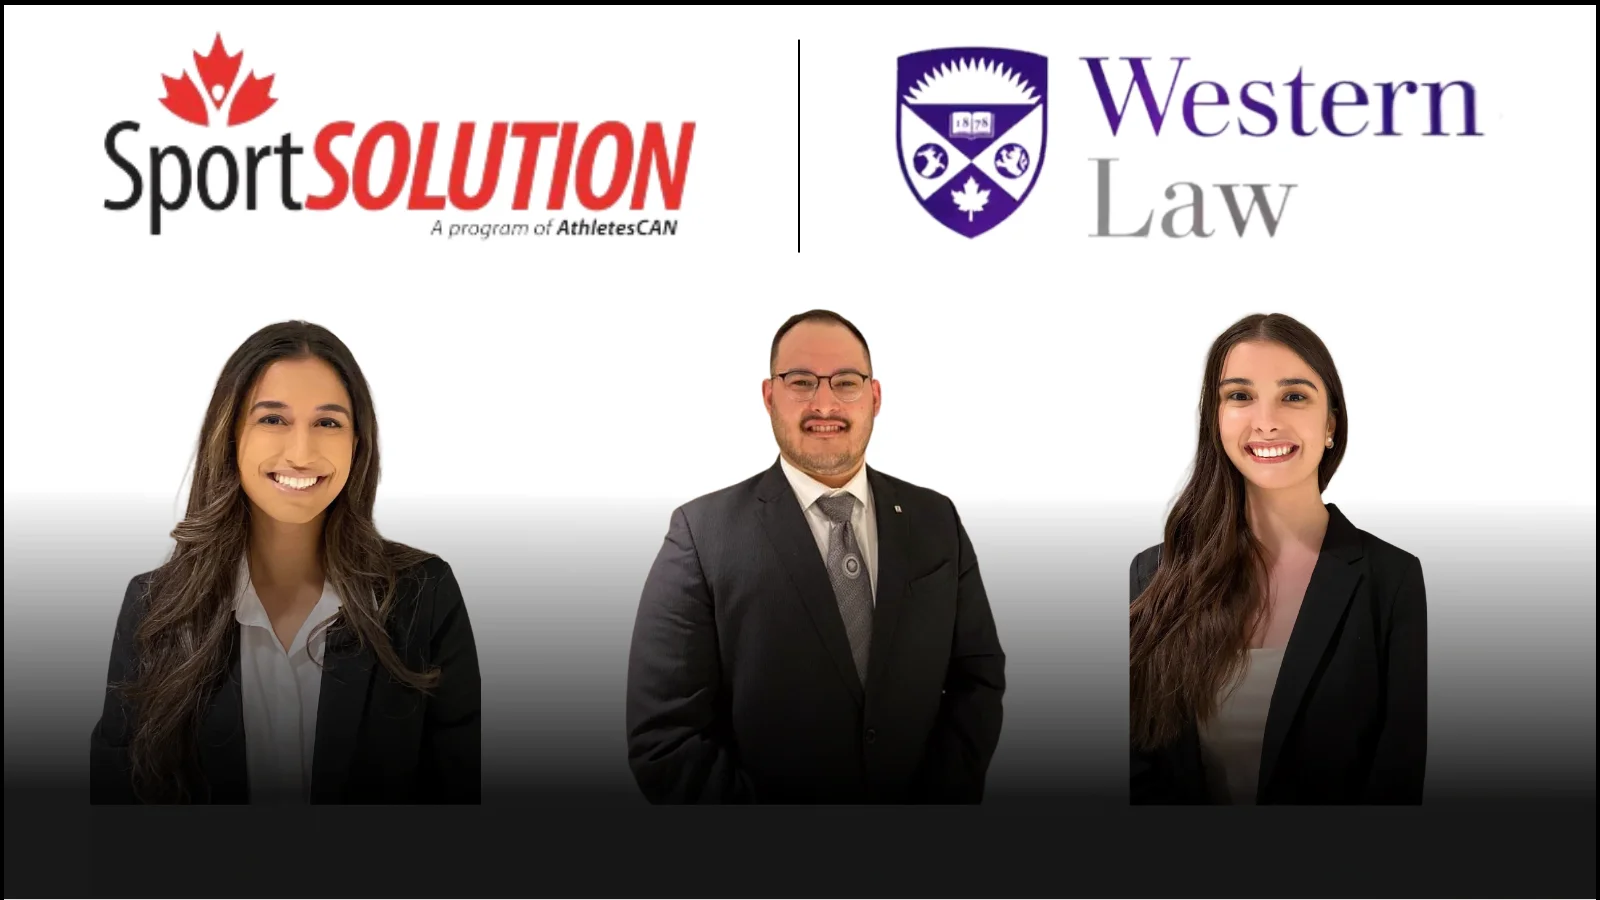 Headshots of the new Sport Solution Program Managers under the program logo and Western Law logo